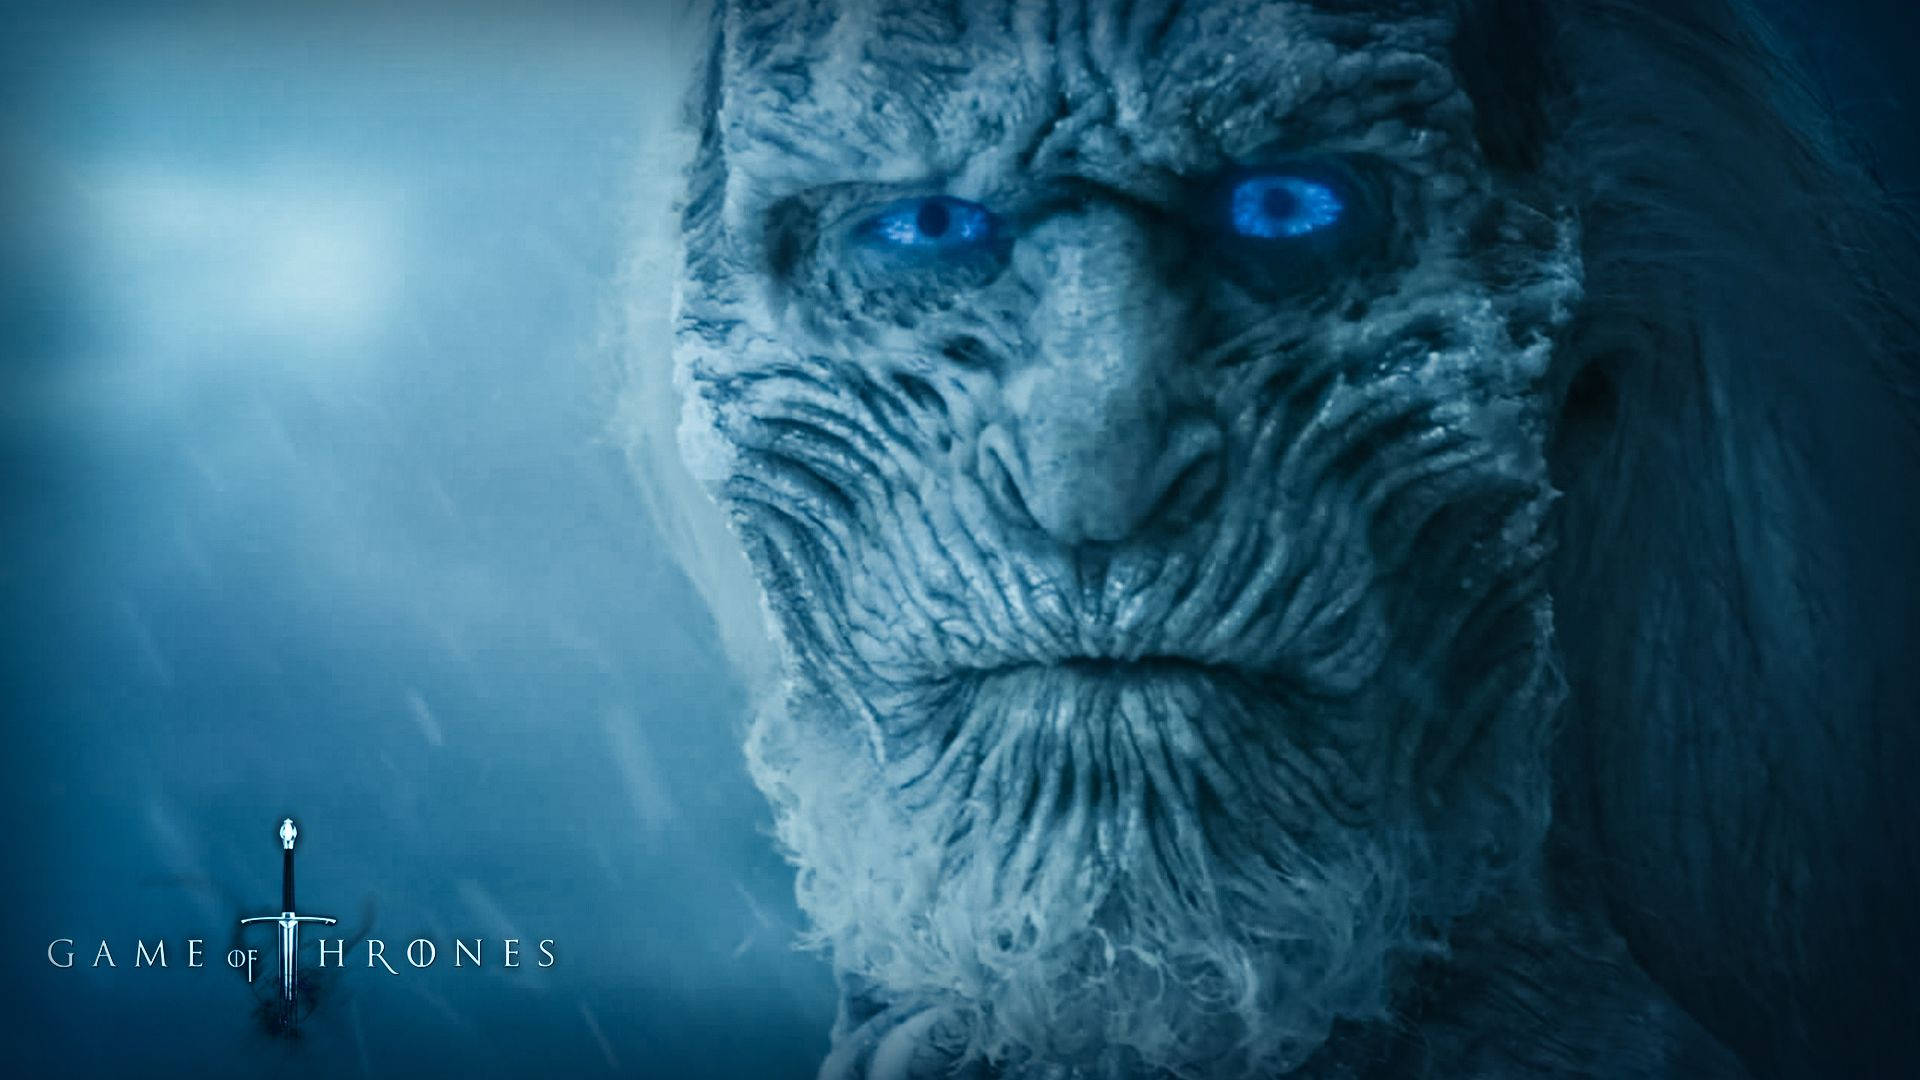 Hd White Walker Of Game Of Thrones Background